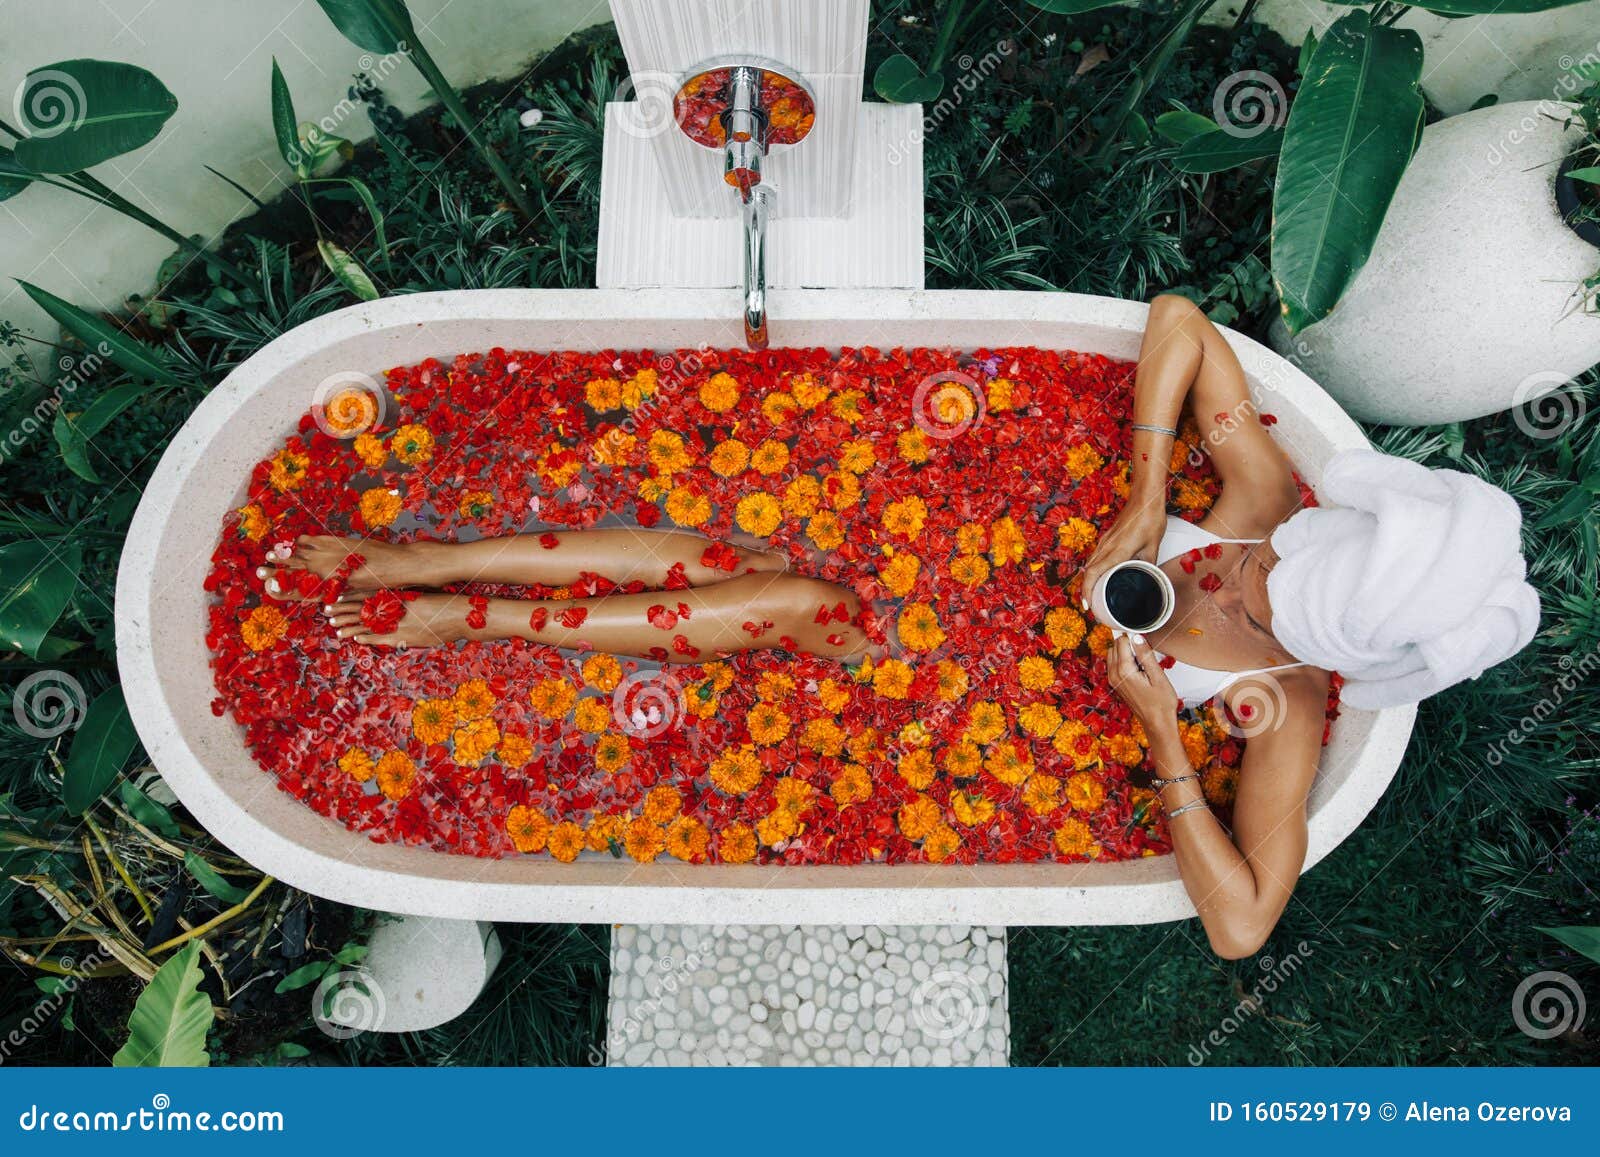 woman relaxing in outdoor bath with flowers in bali spa hotel